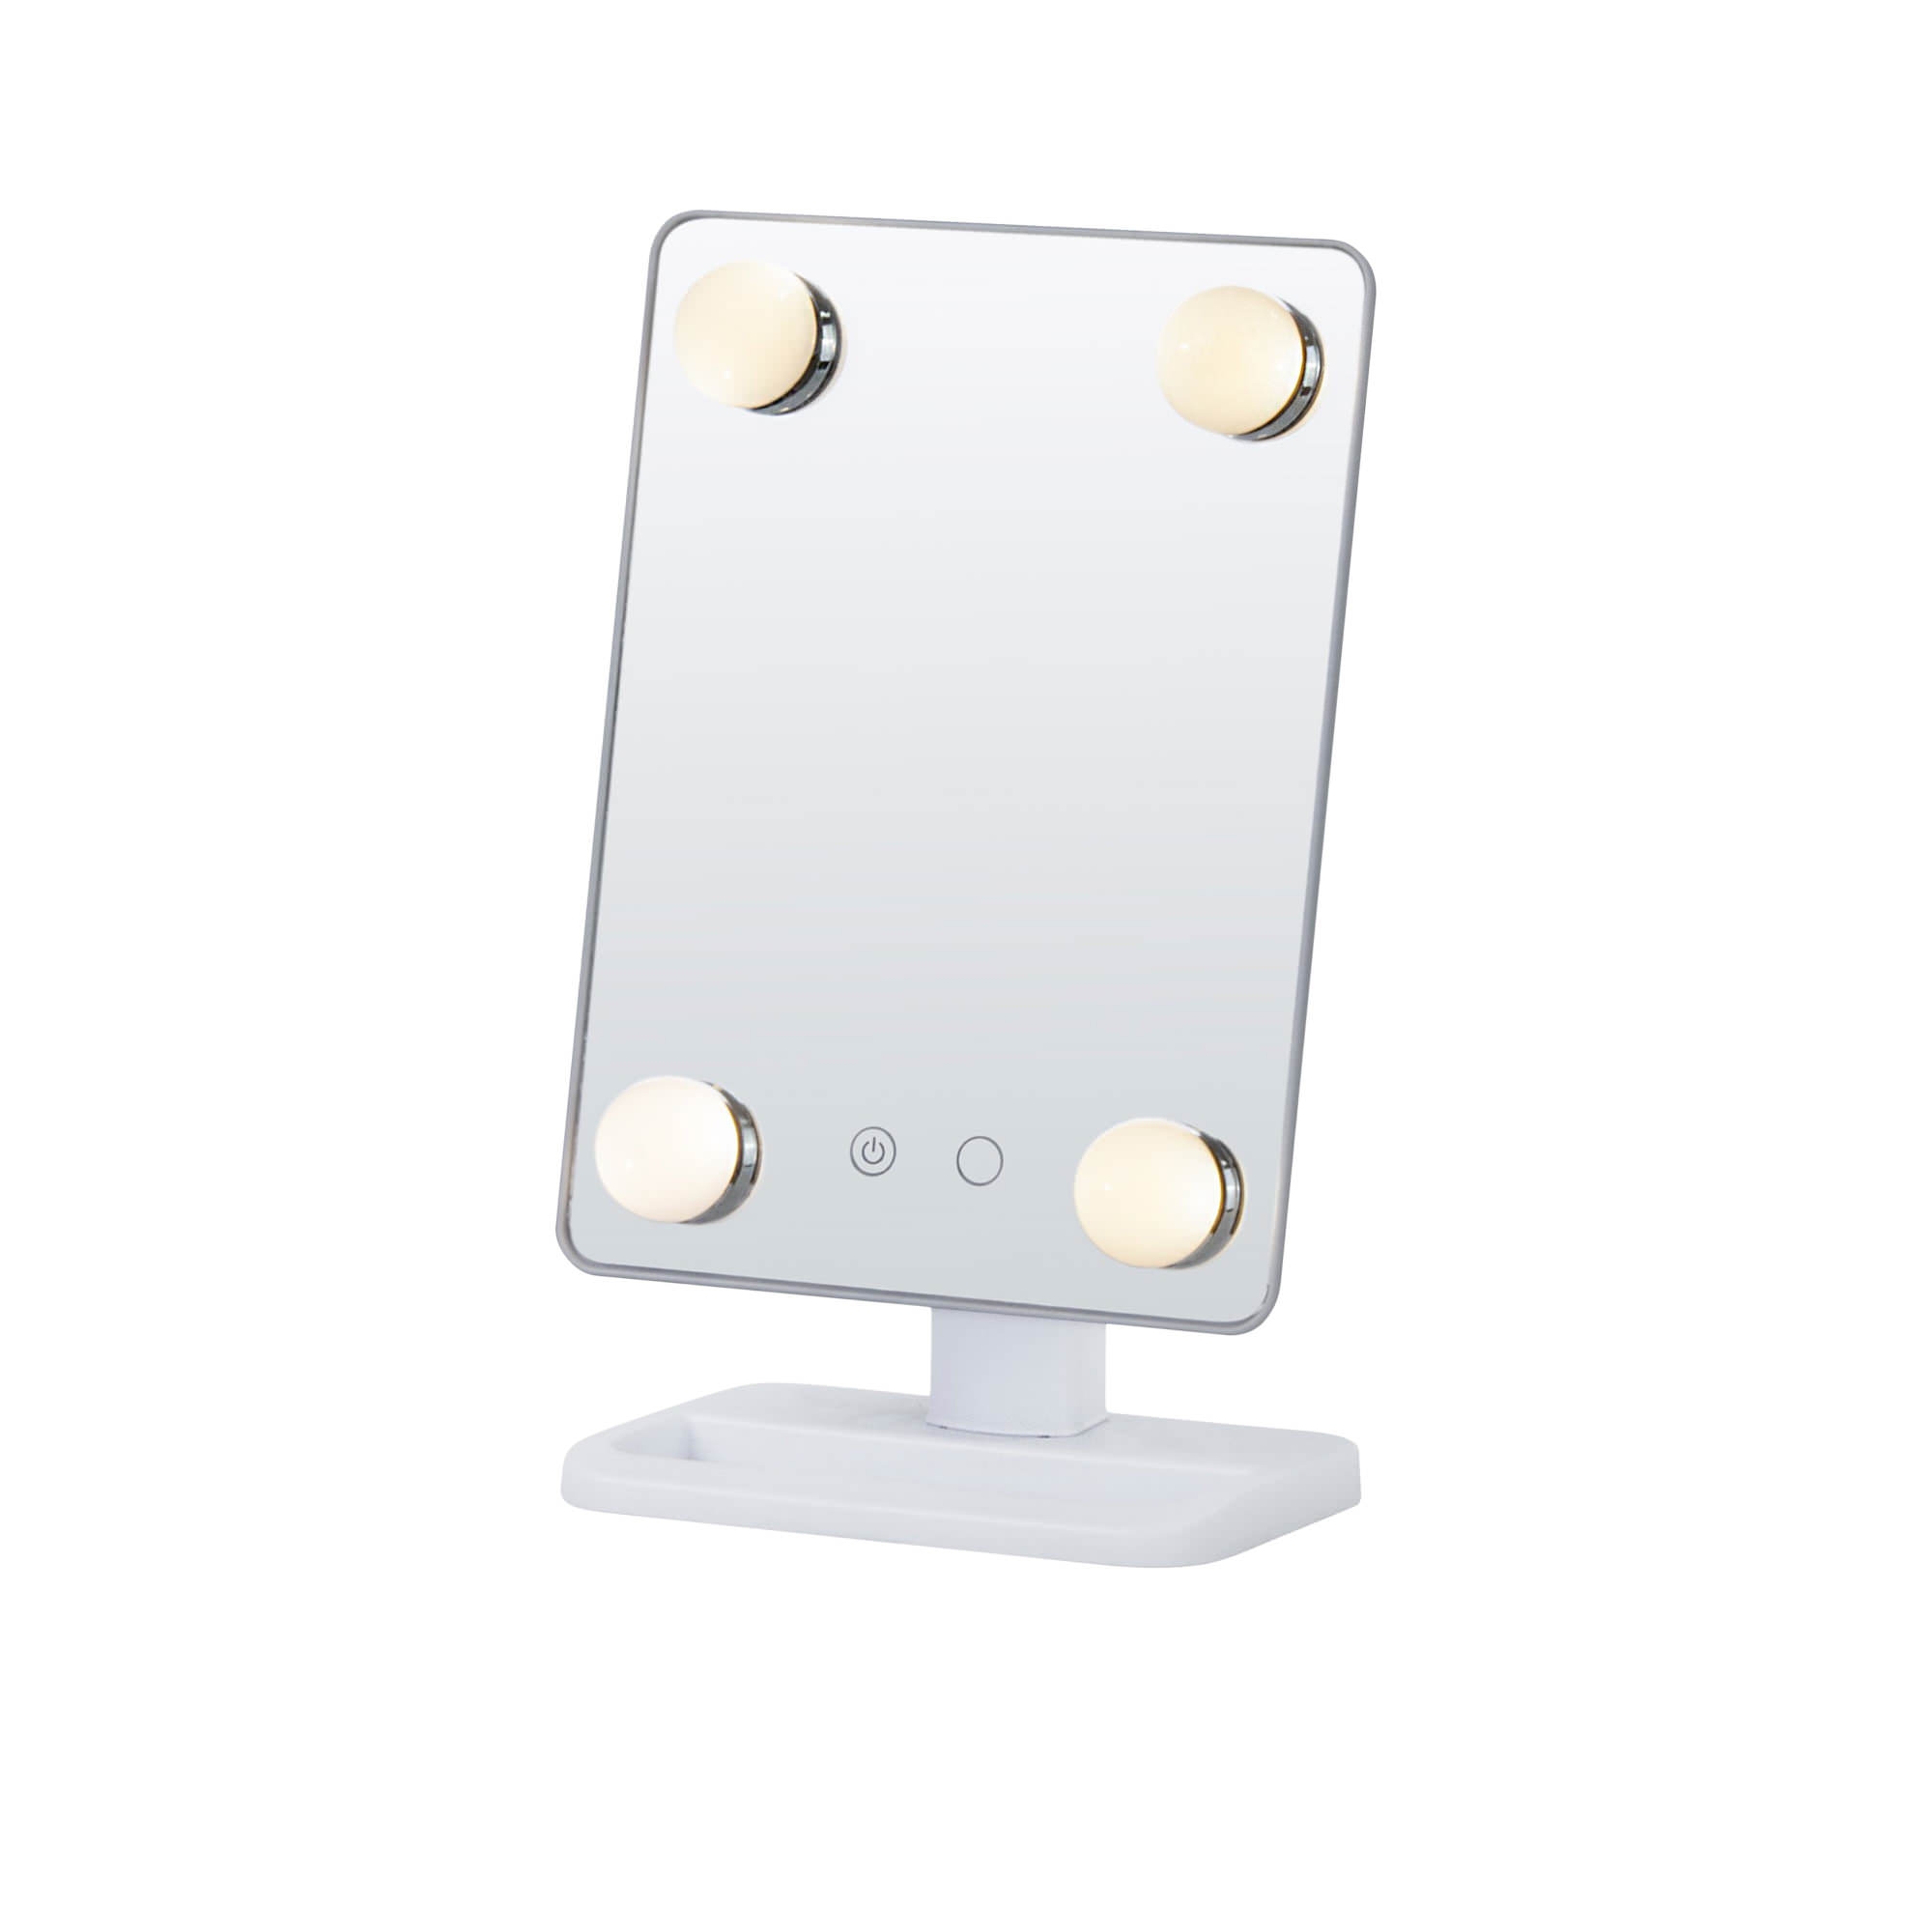 Clevinger Bel Air Rectangular Vanity Mirror with Led Lights White Image 1